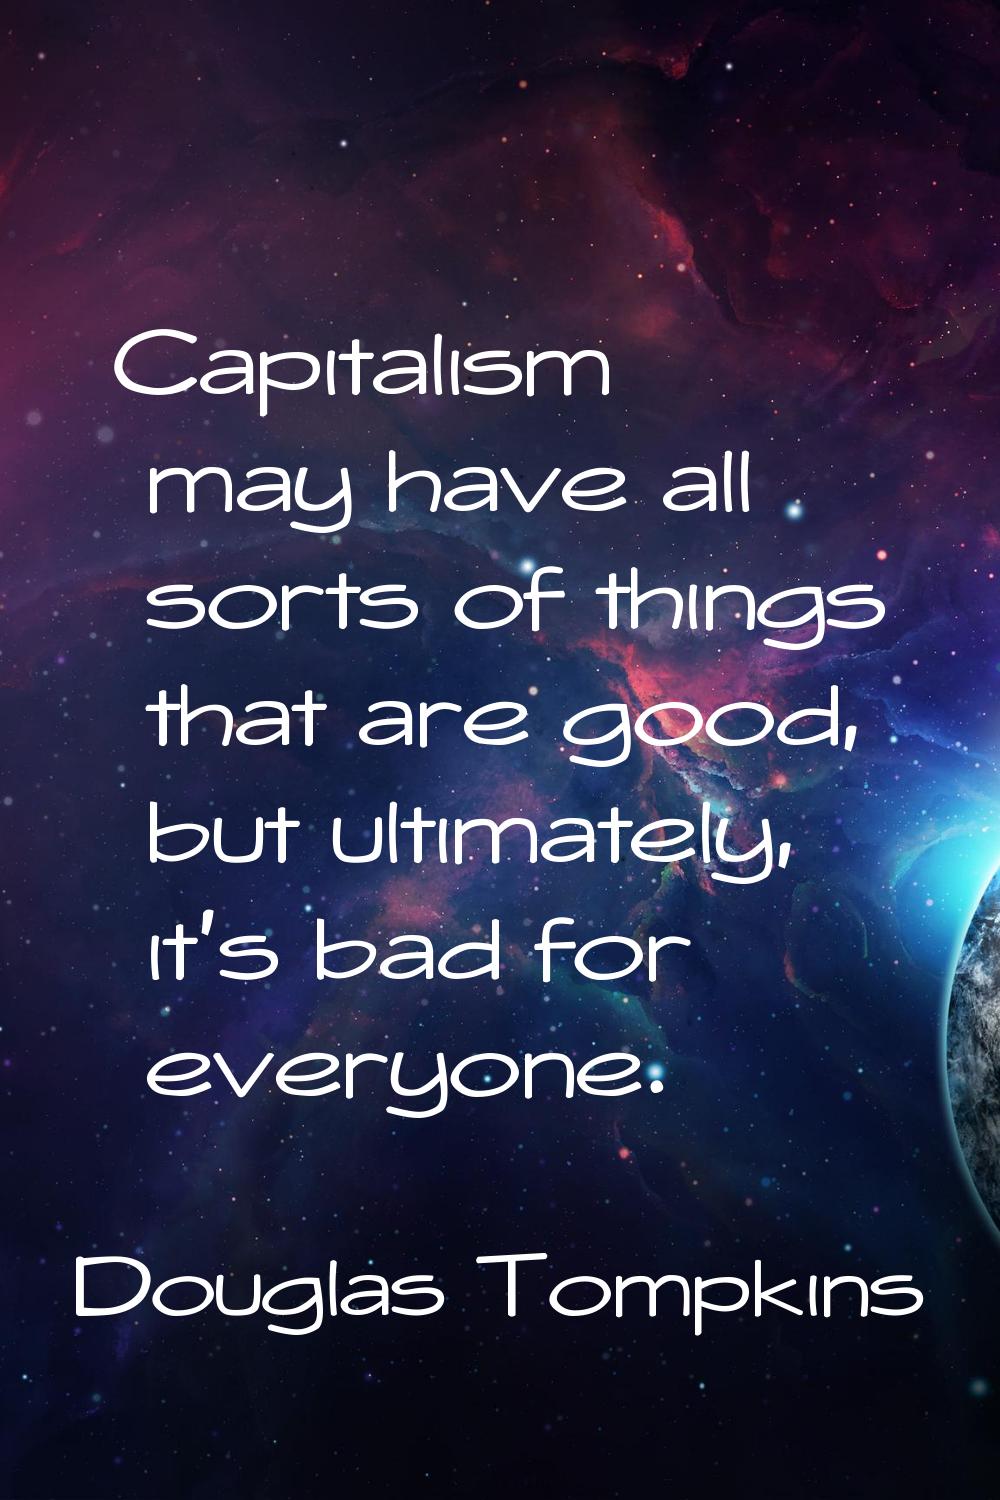 Capitalism may have all sorts of things that are good, but ultimately, it's bad for everyone.